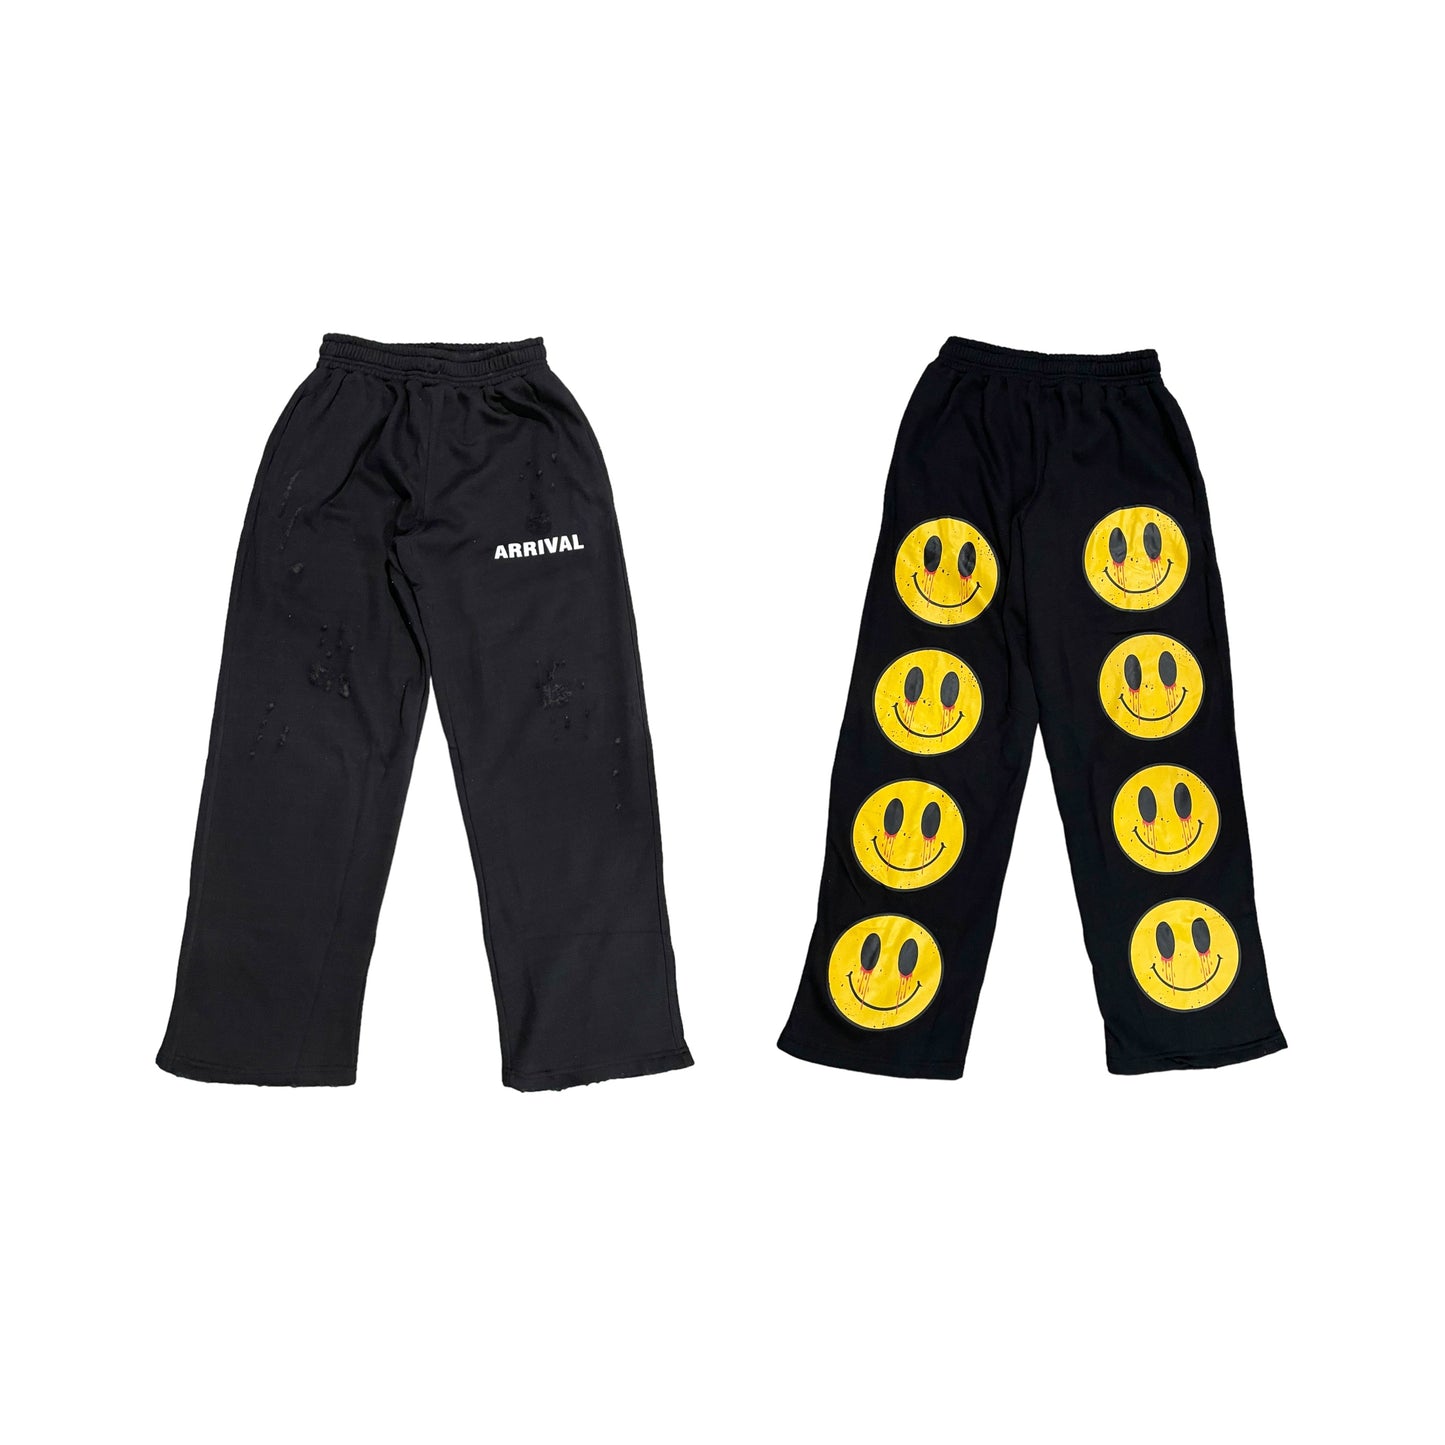 DESTROYED BAGGY SWEATPANTS (MIDNIGHT BLACK)